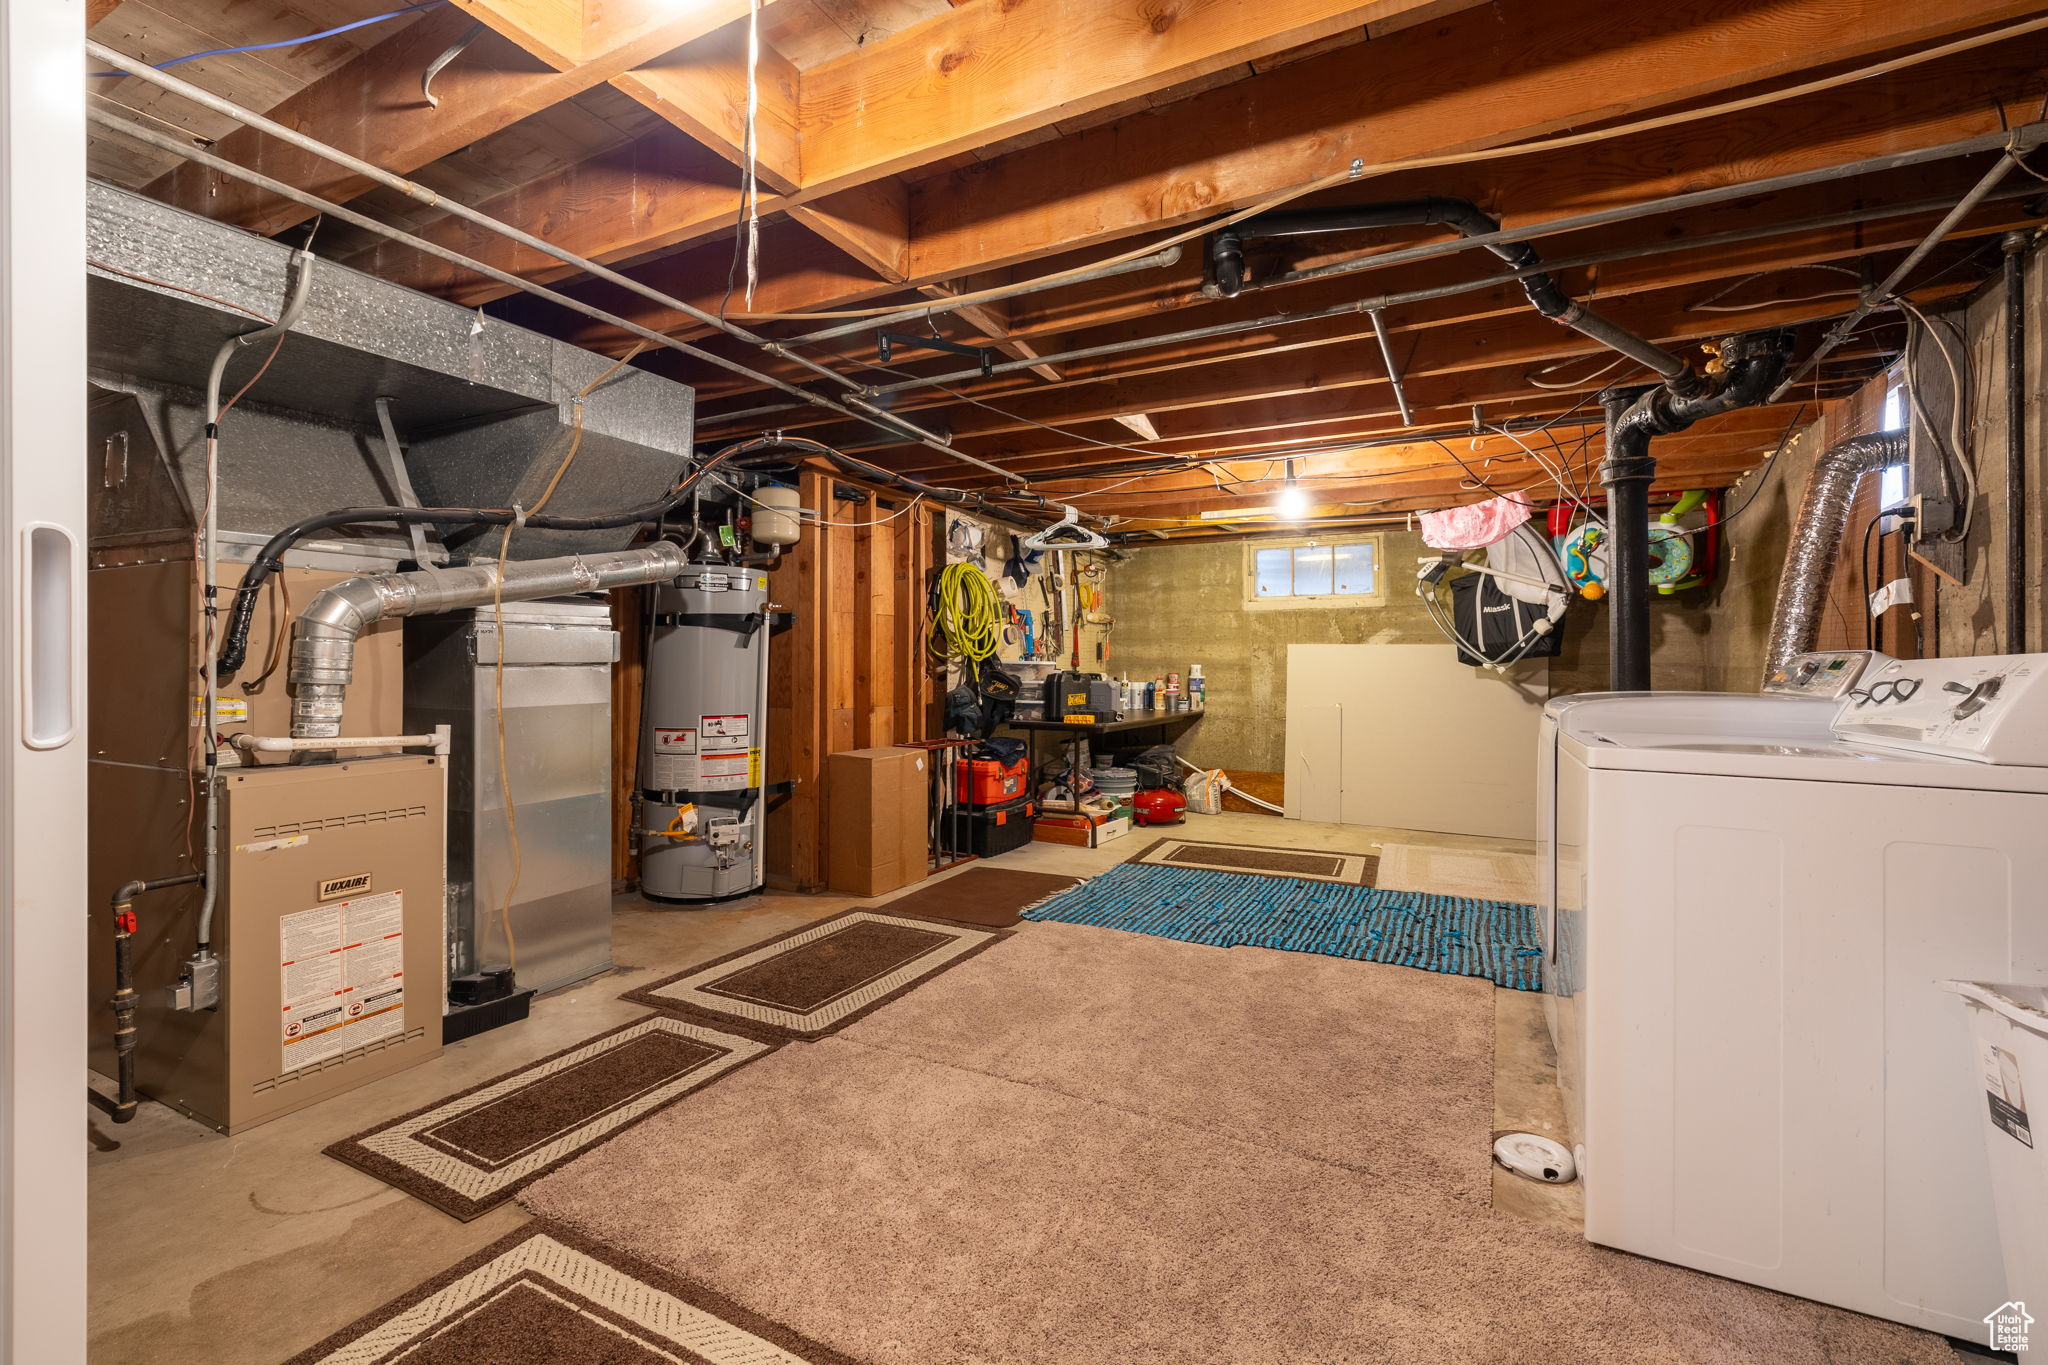 Basement with separate washer and dryer and secured water heater